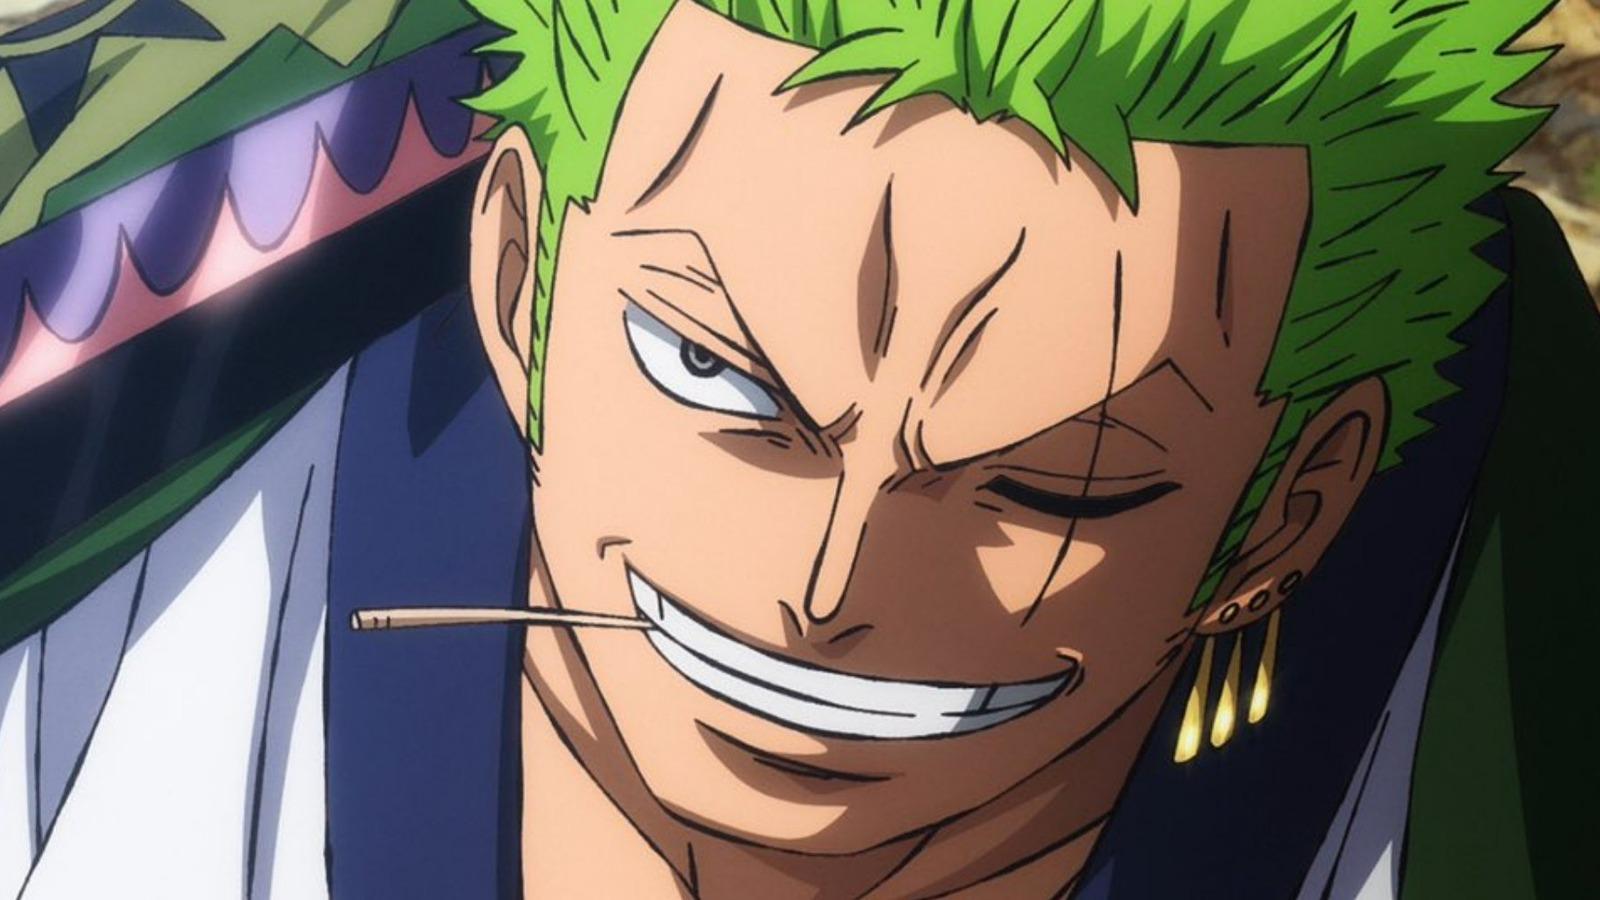 An image of Roronoa Zoro from One Piece in the Wano Arc